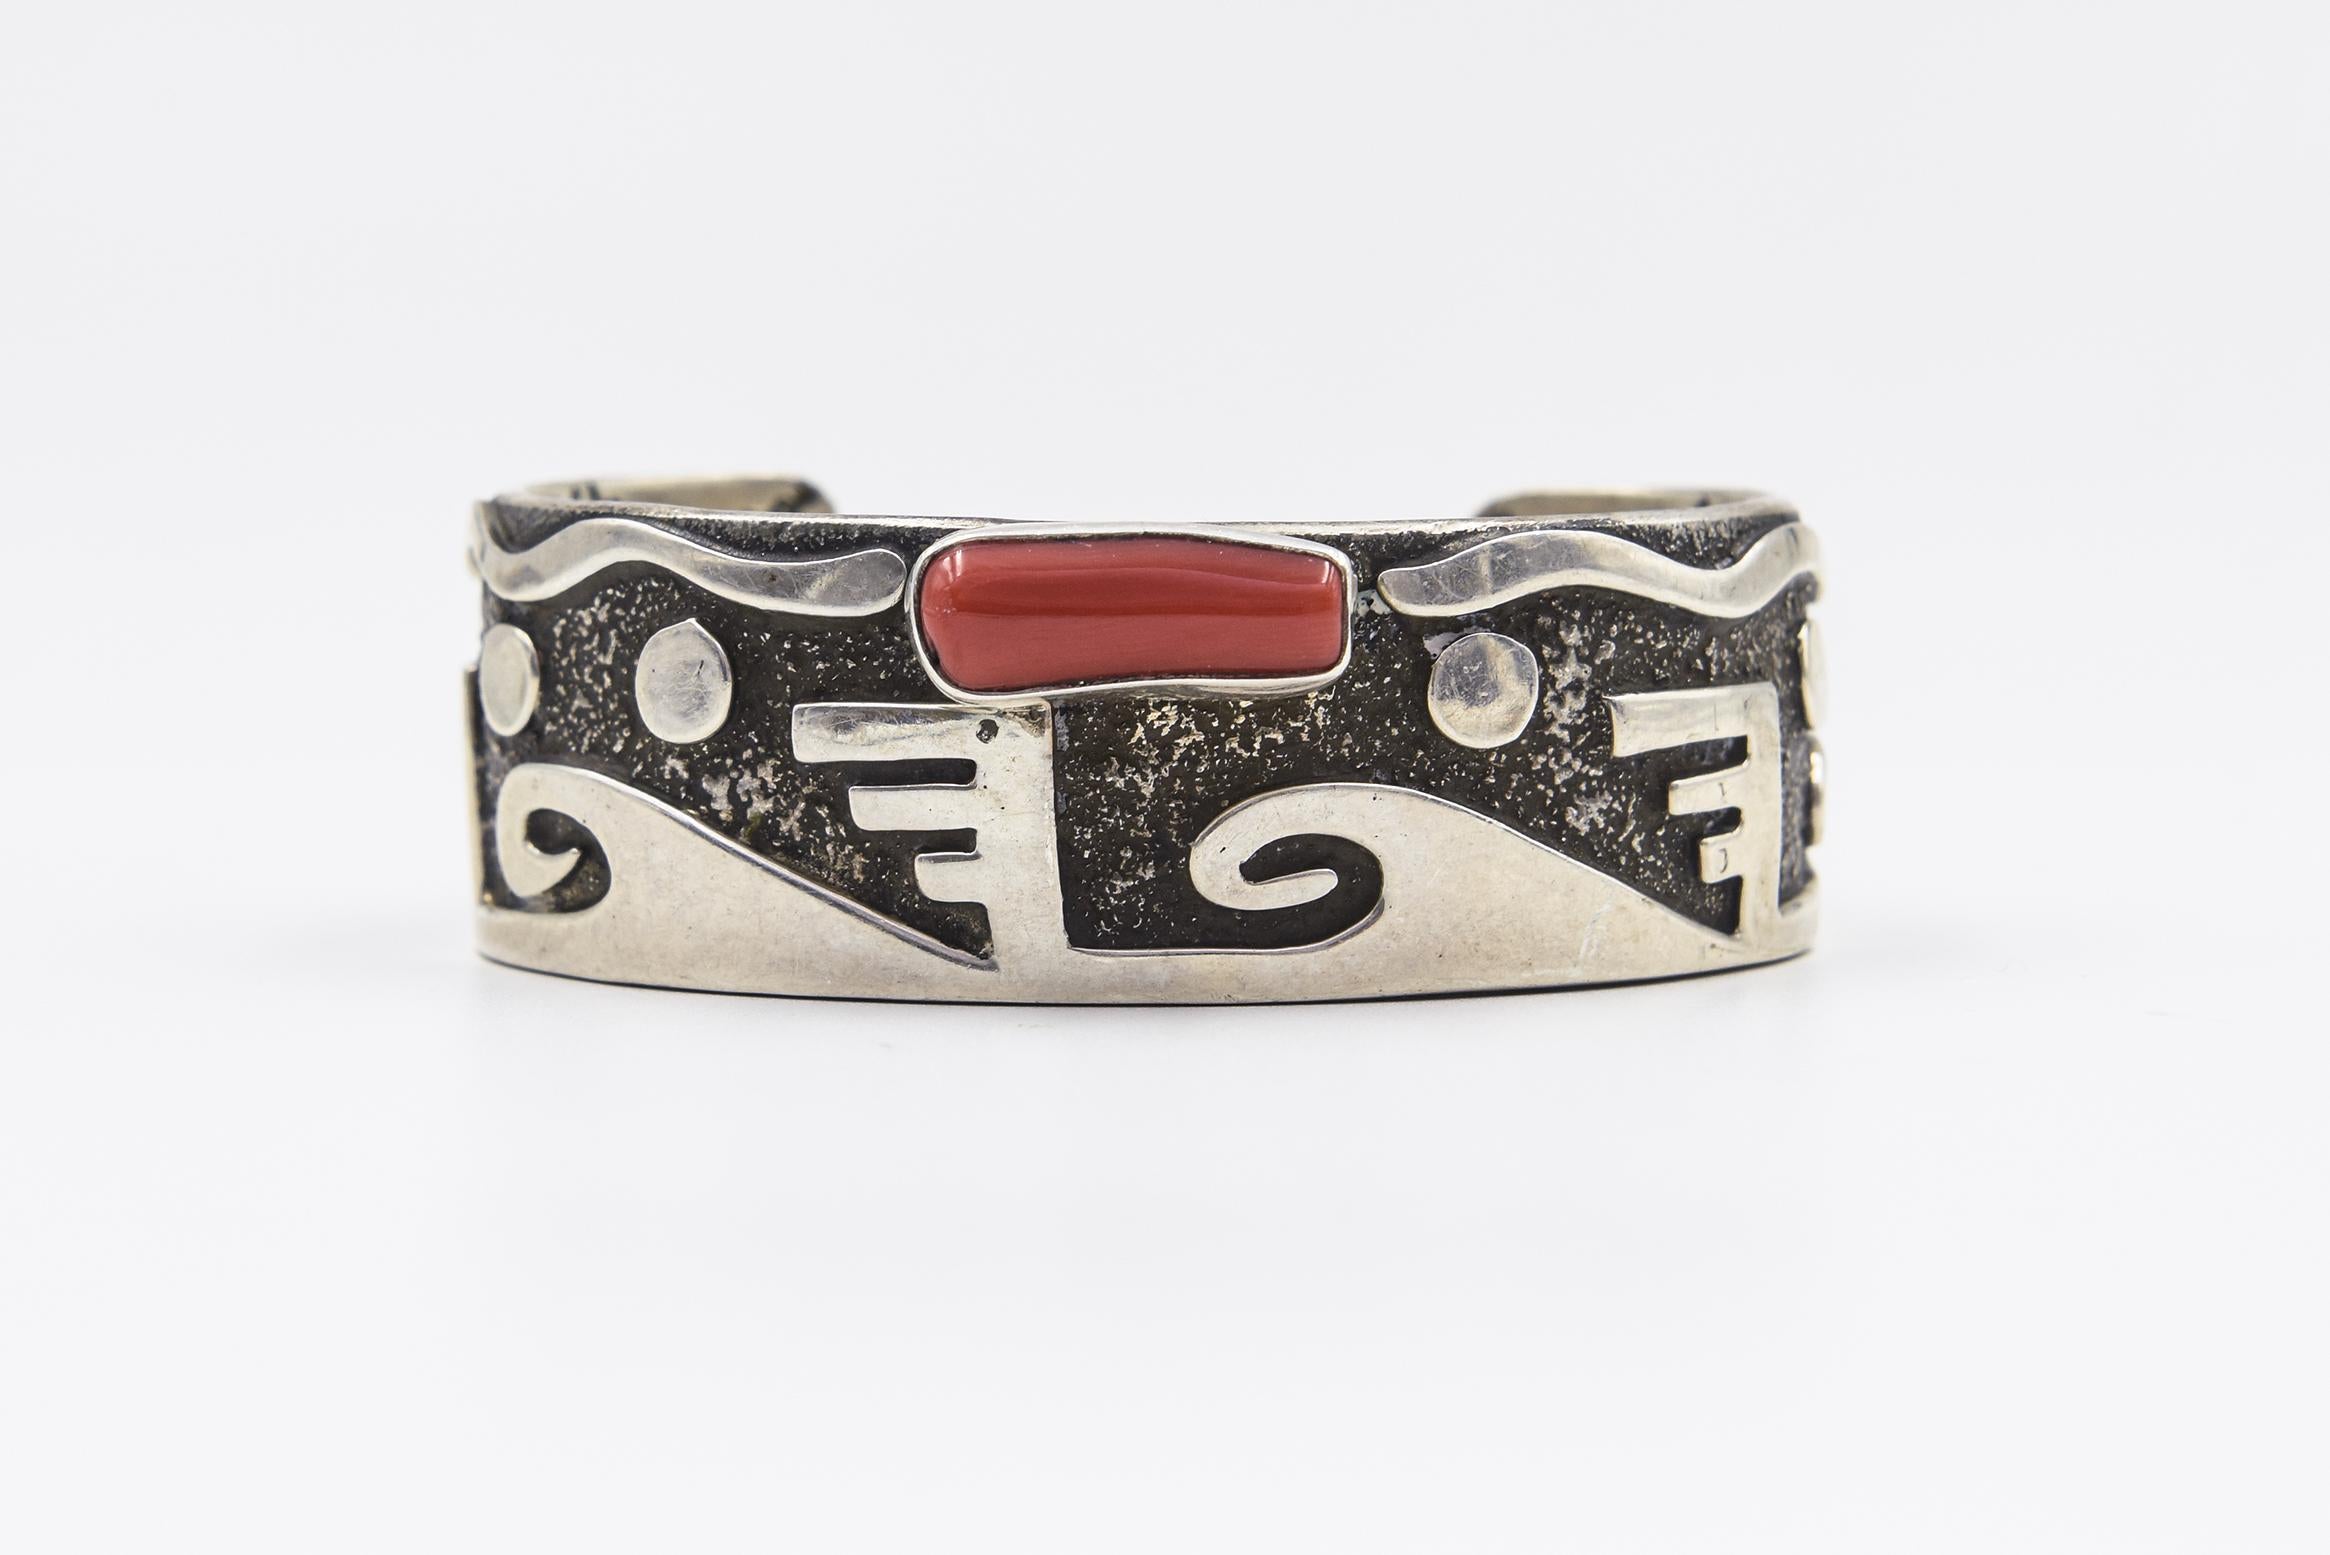 Navajo Zuni Native American artist Alex Sanchez is legendary for his petroglyphs designs in sterling silver. This stunning cuff bracelet is a perfect example of his work that also has a red Italian coral accent.  A petroglyph is an image created by